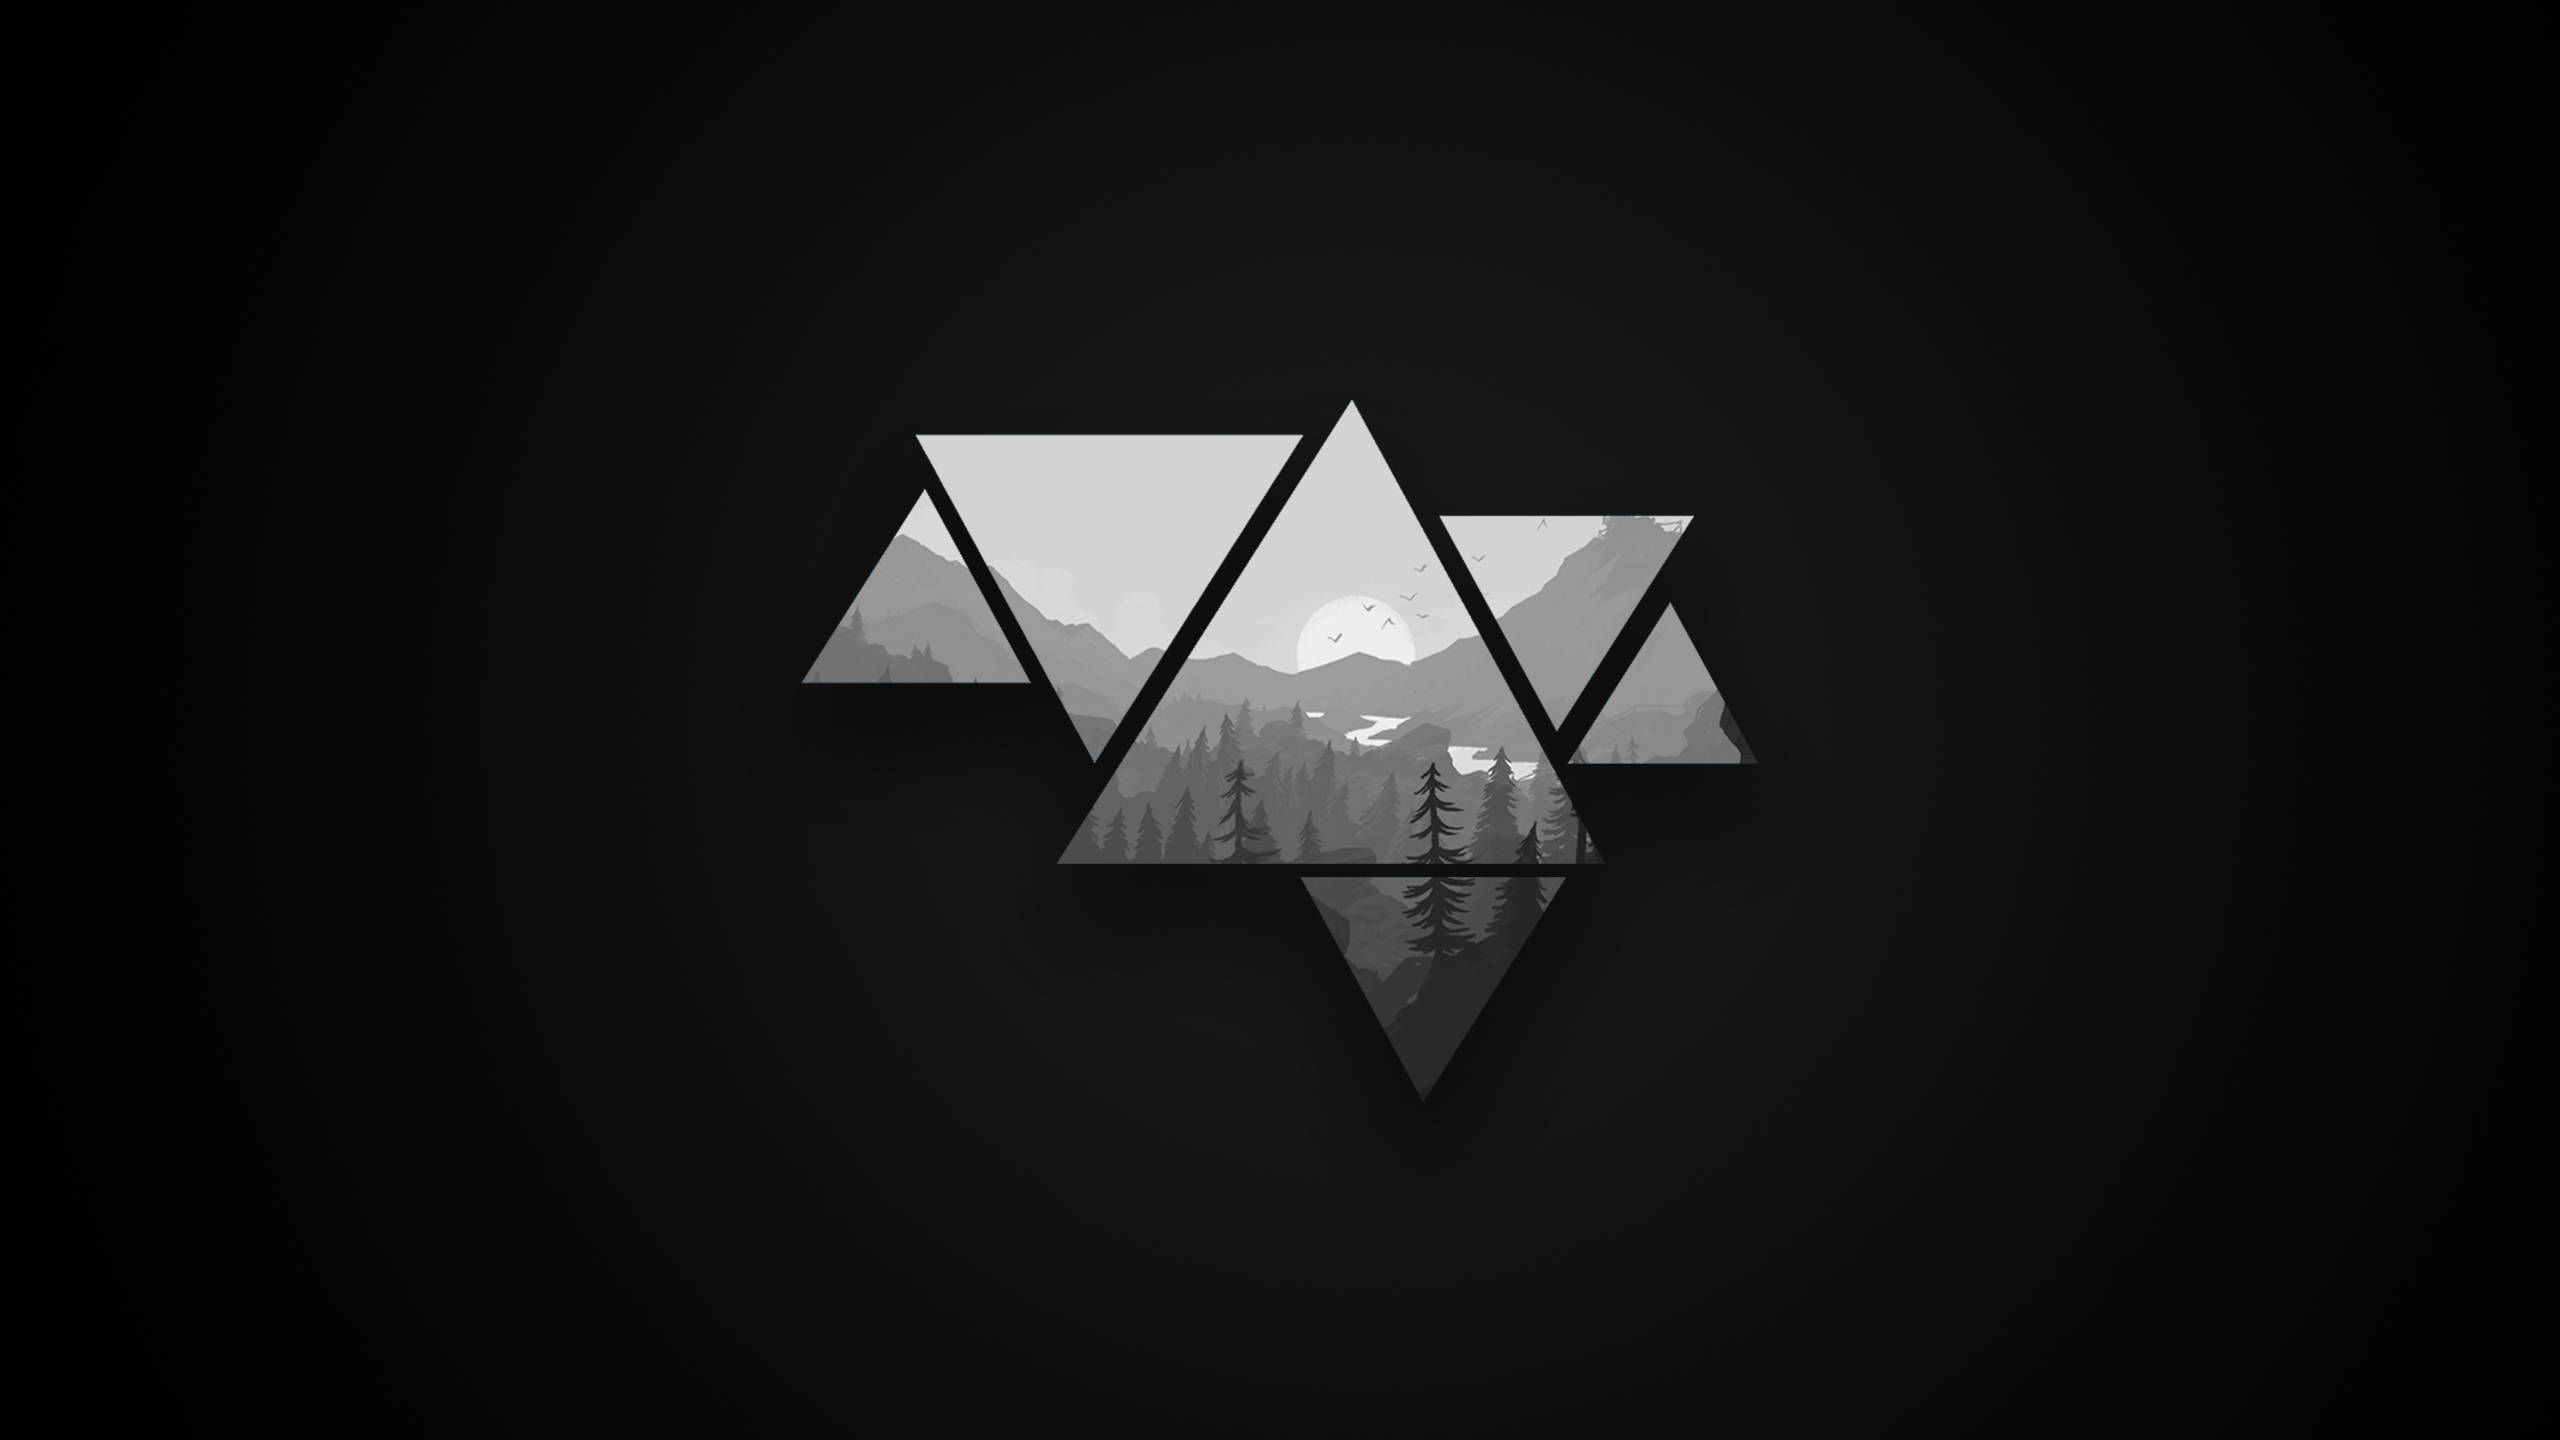 Black and white geometric wallpaper with triangles and a forest landscape - Minimalist